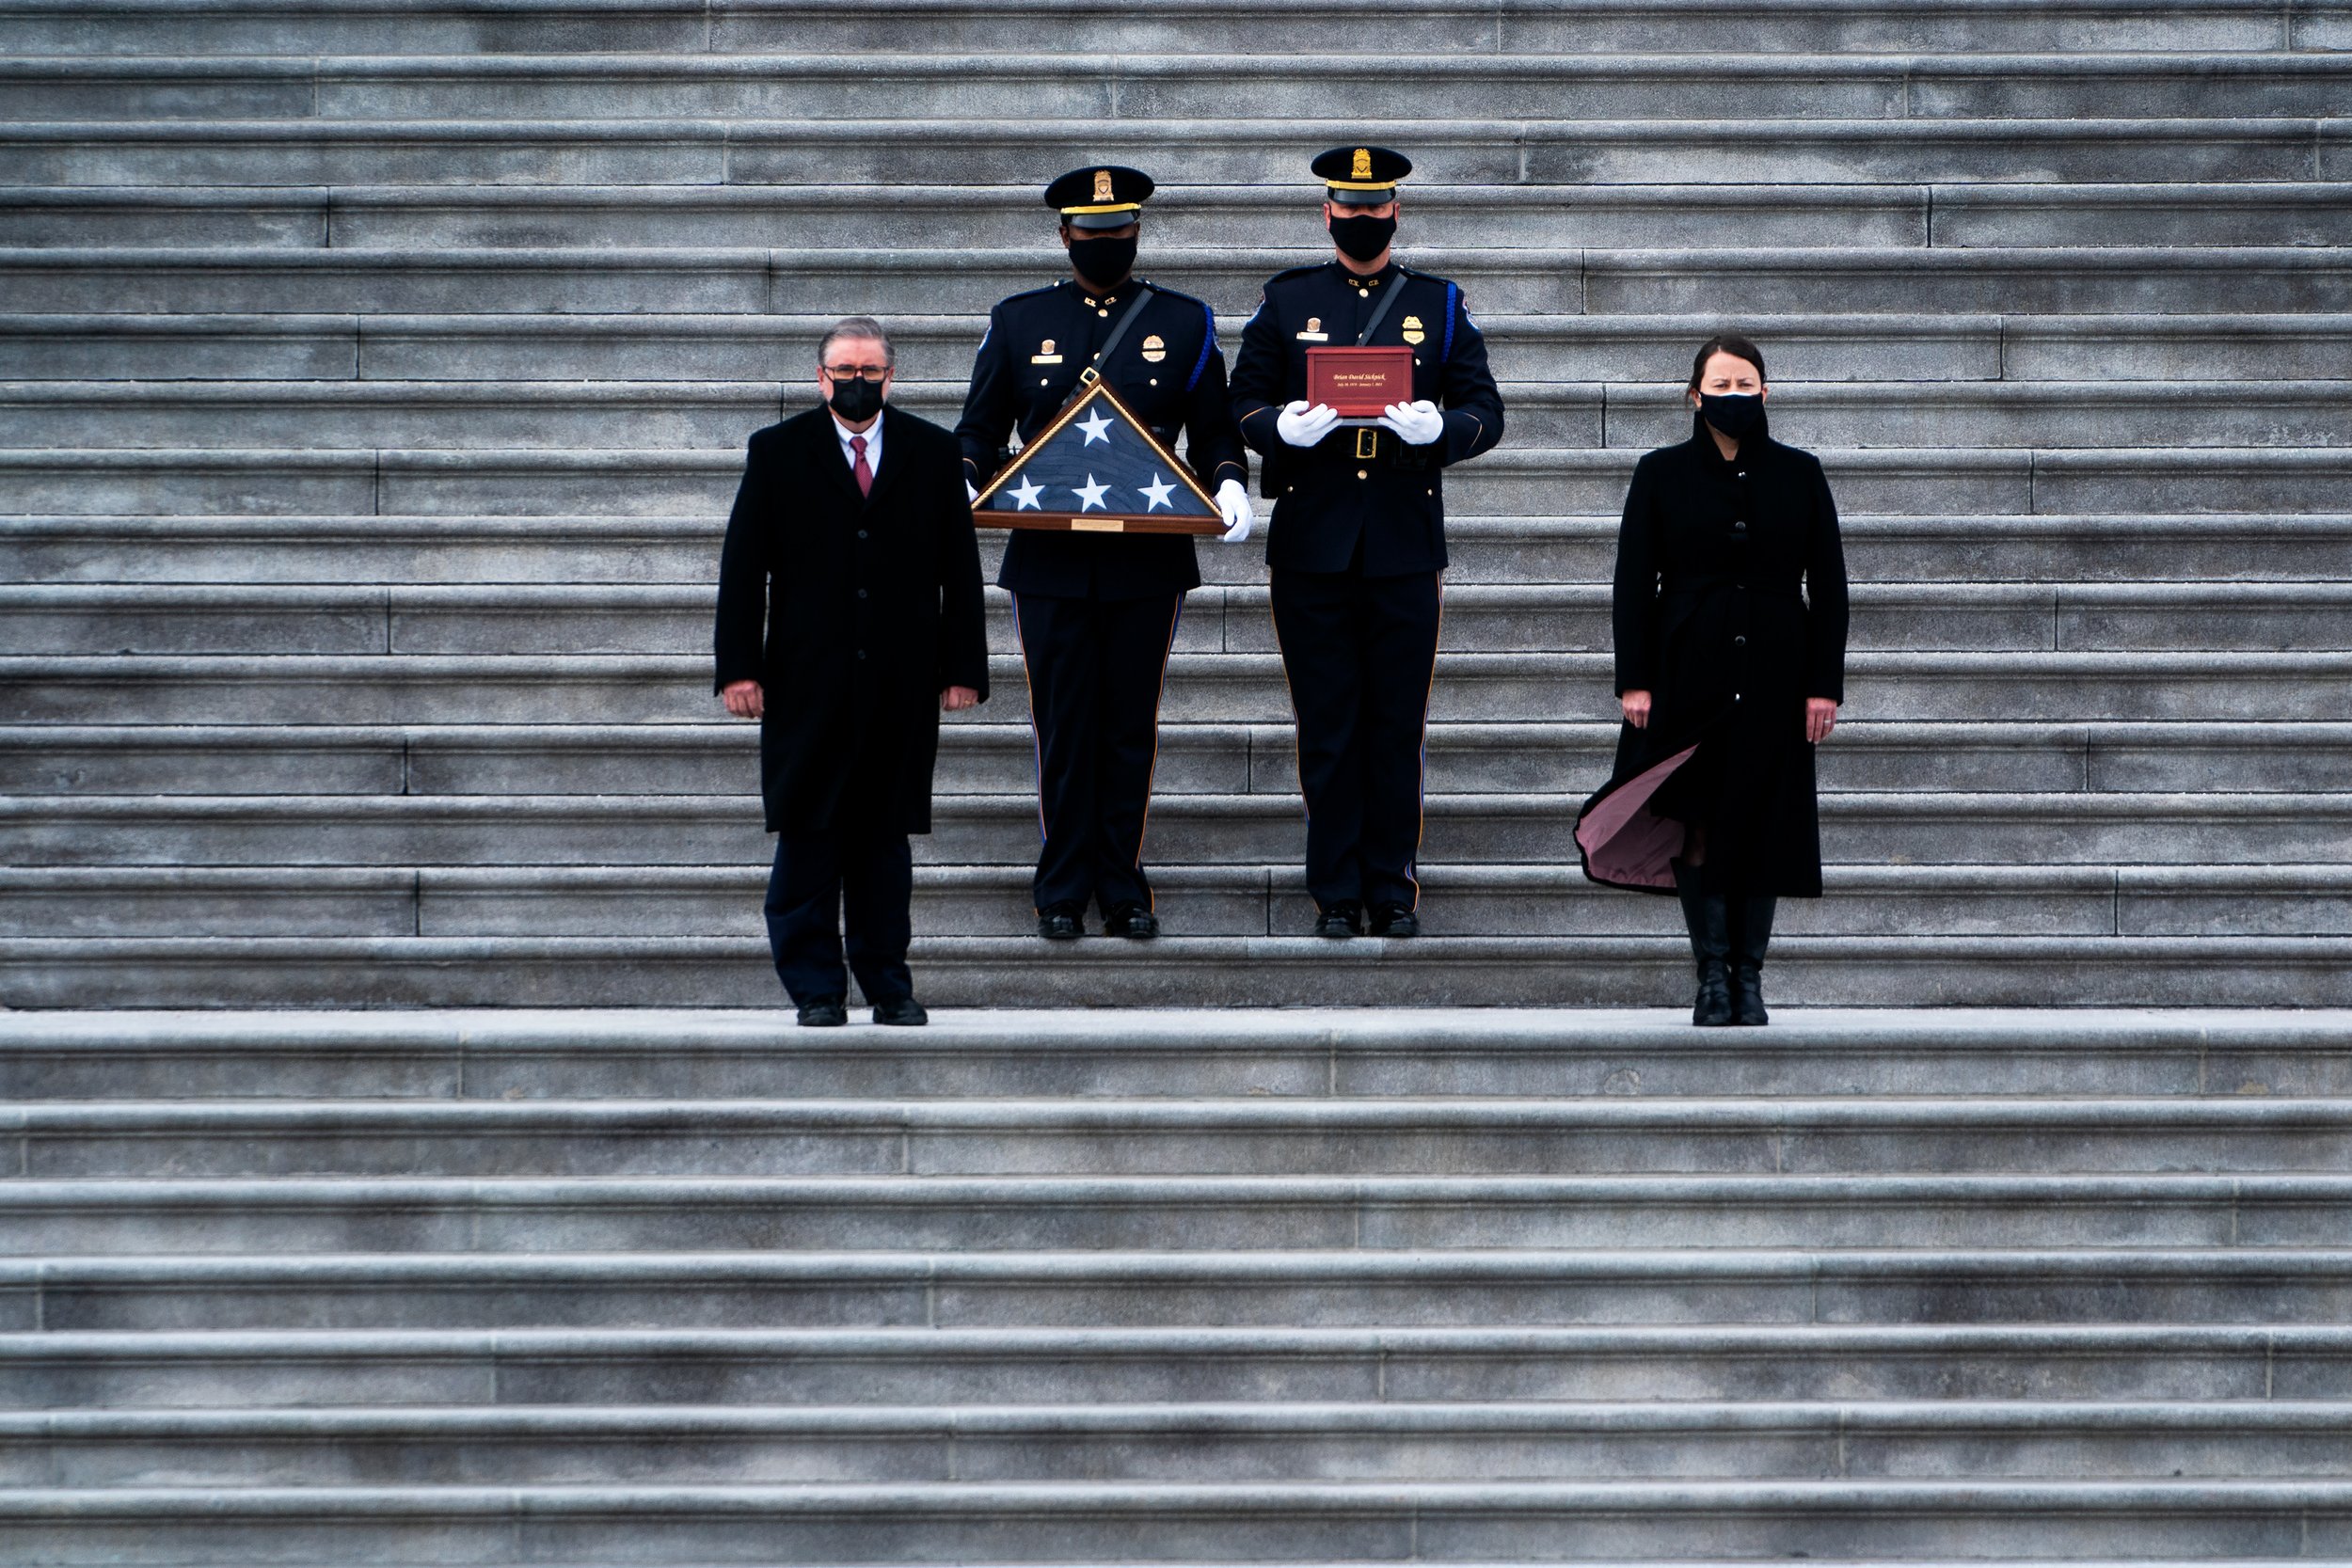  U.S. Capitol Police pay their respects during a ceremony memorializing U.S. Capitol Police Officer Brian D. Sicknick, 42. 